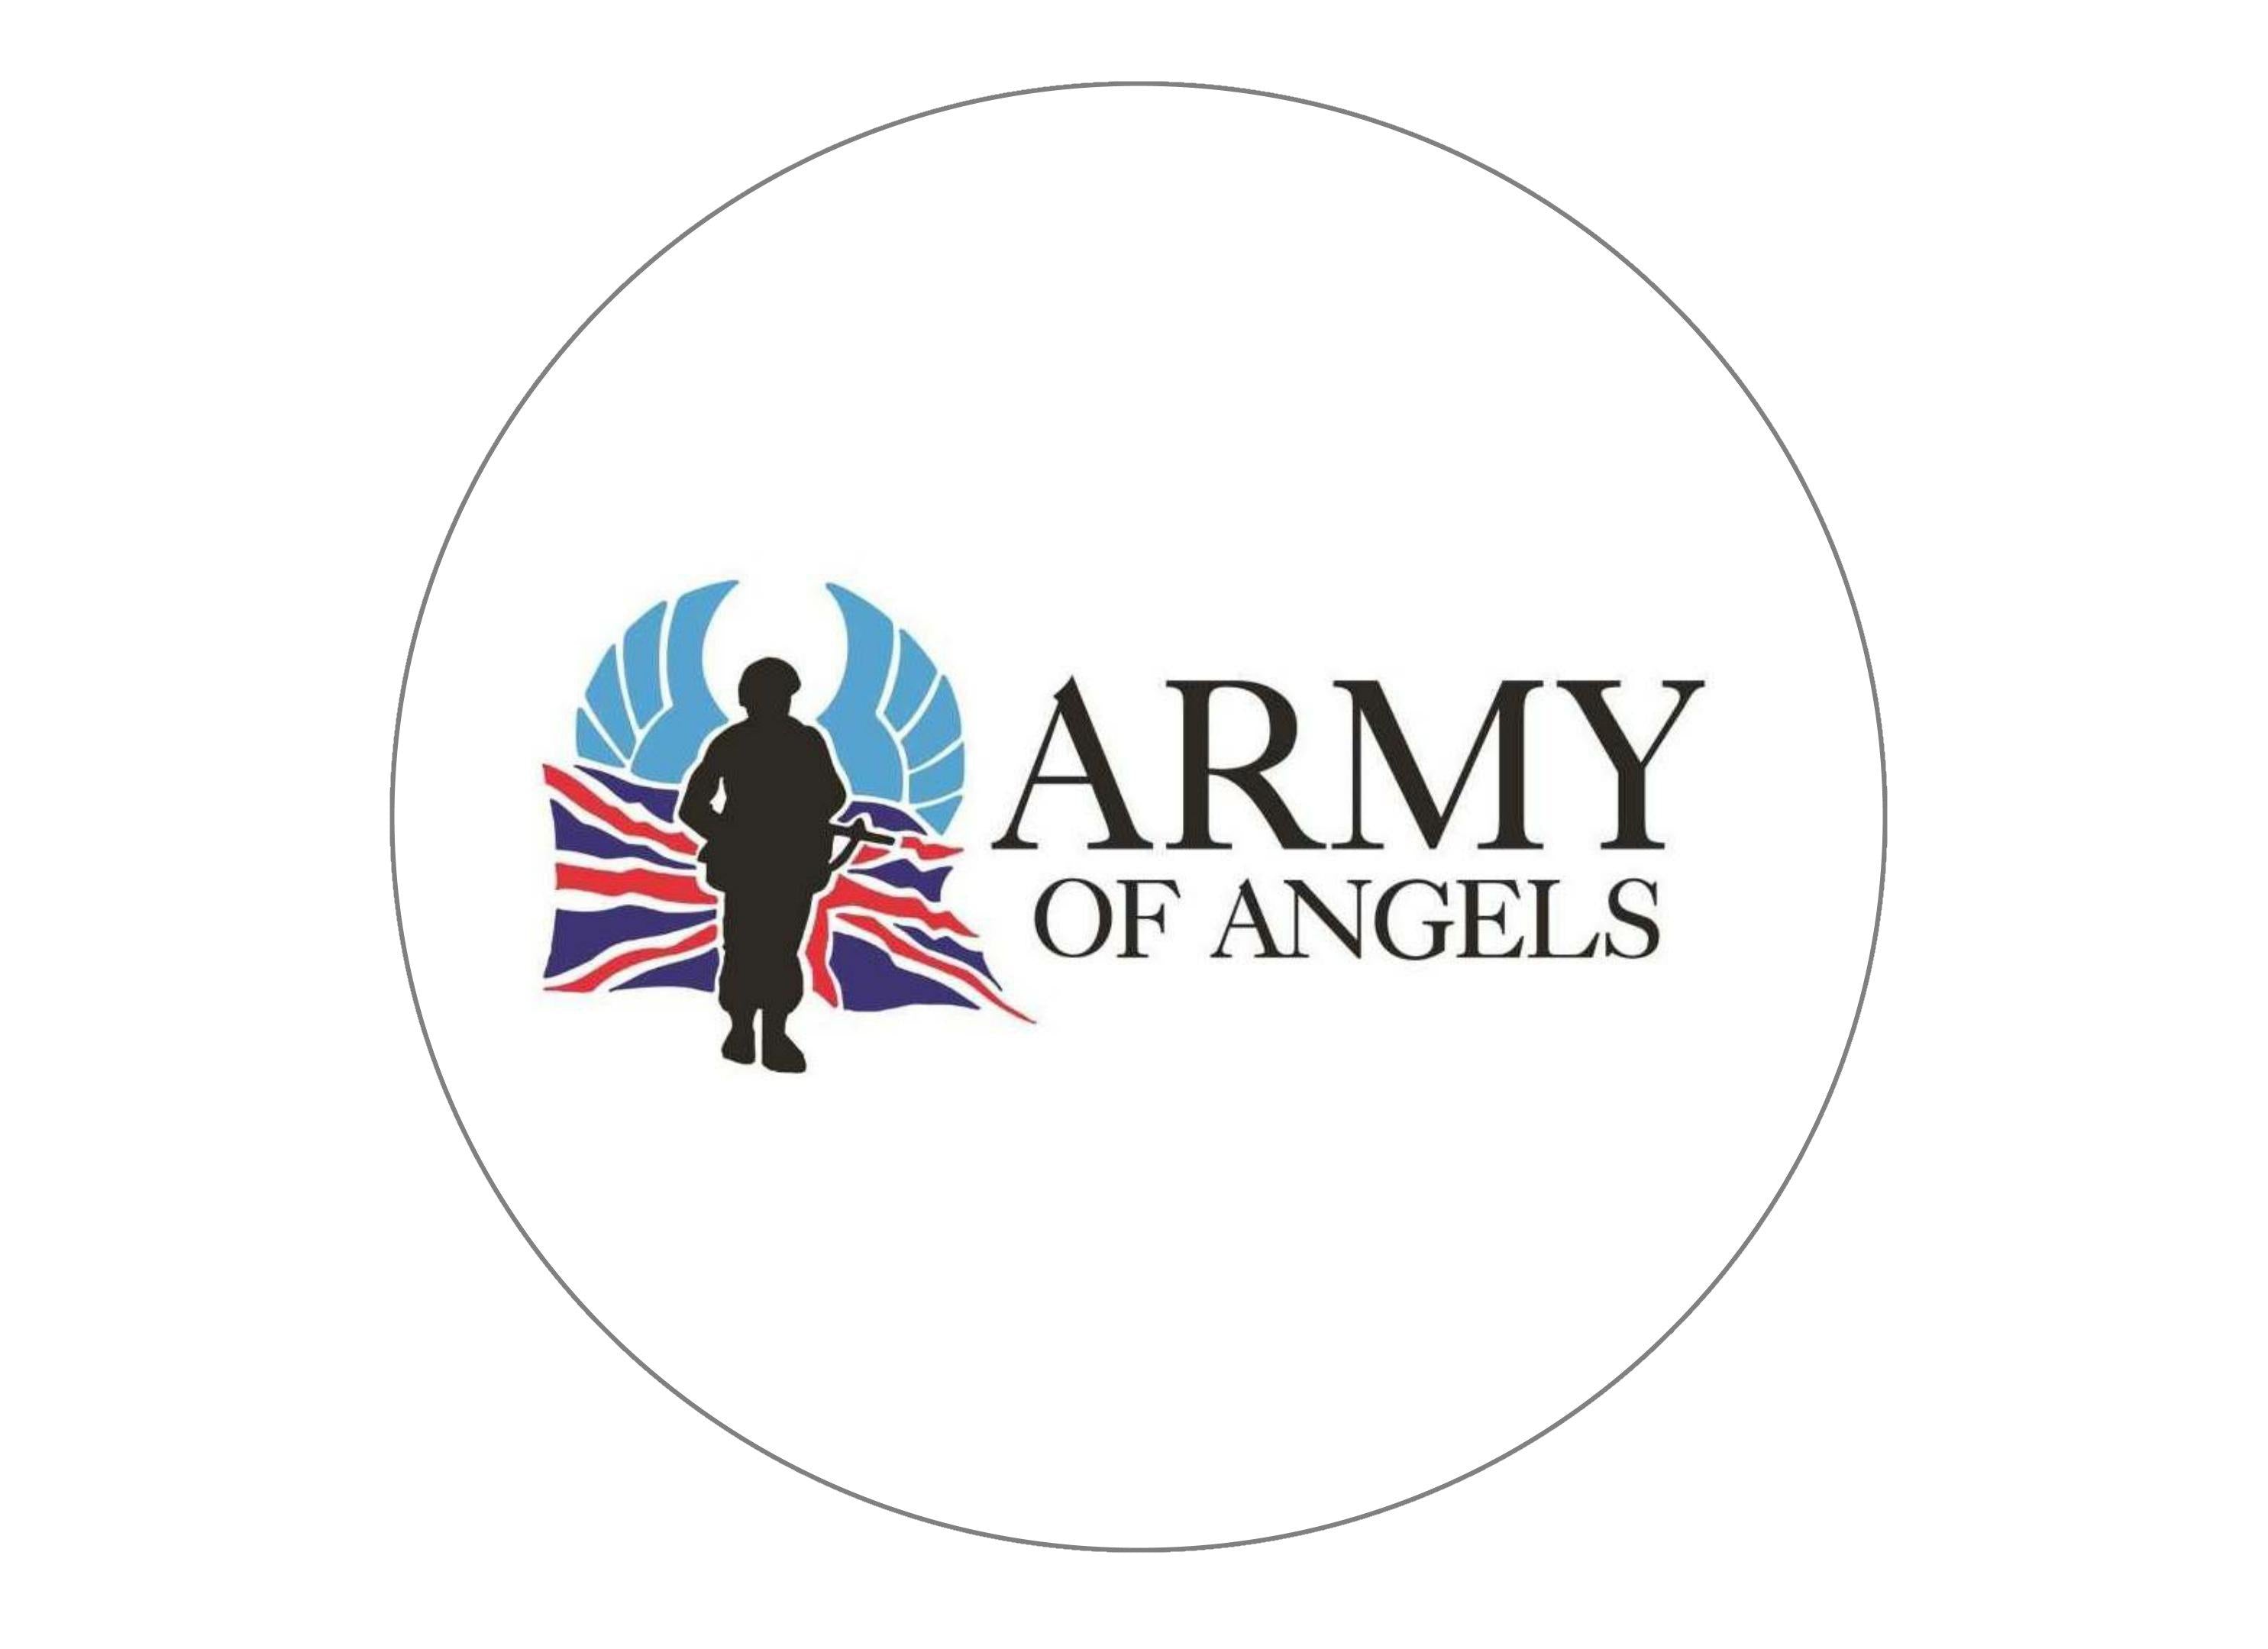 190mm edible printed cake toppers in support of Army of Angels.